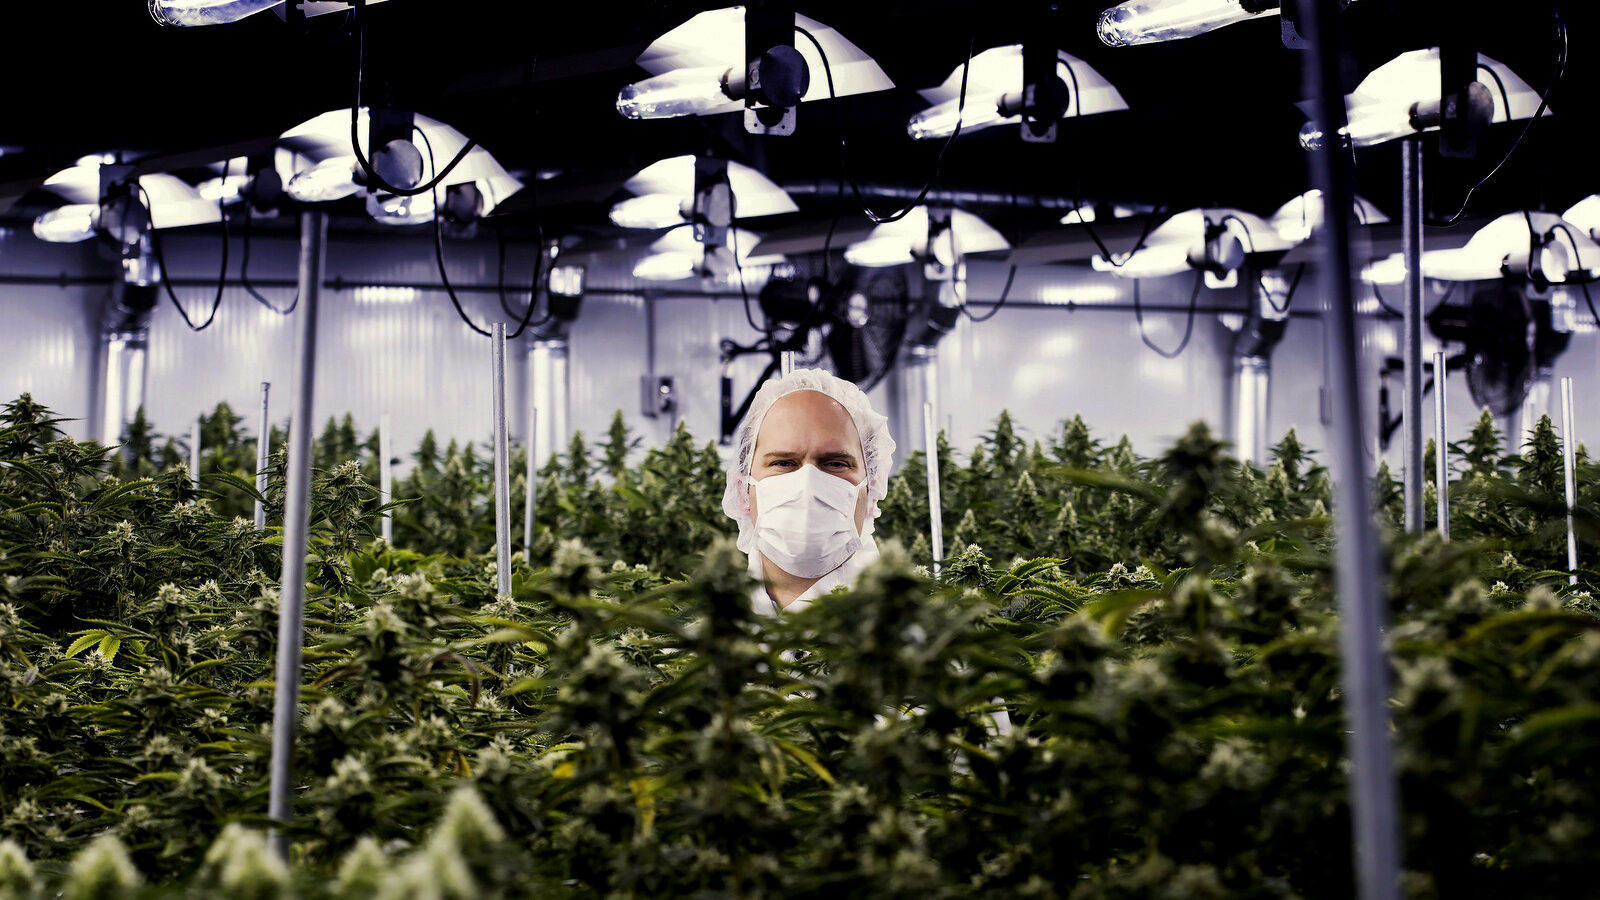 Neil Closner, MedReleaf, chief executive officer poses for photographs at the growing facility in Markham, Ontario